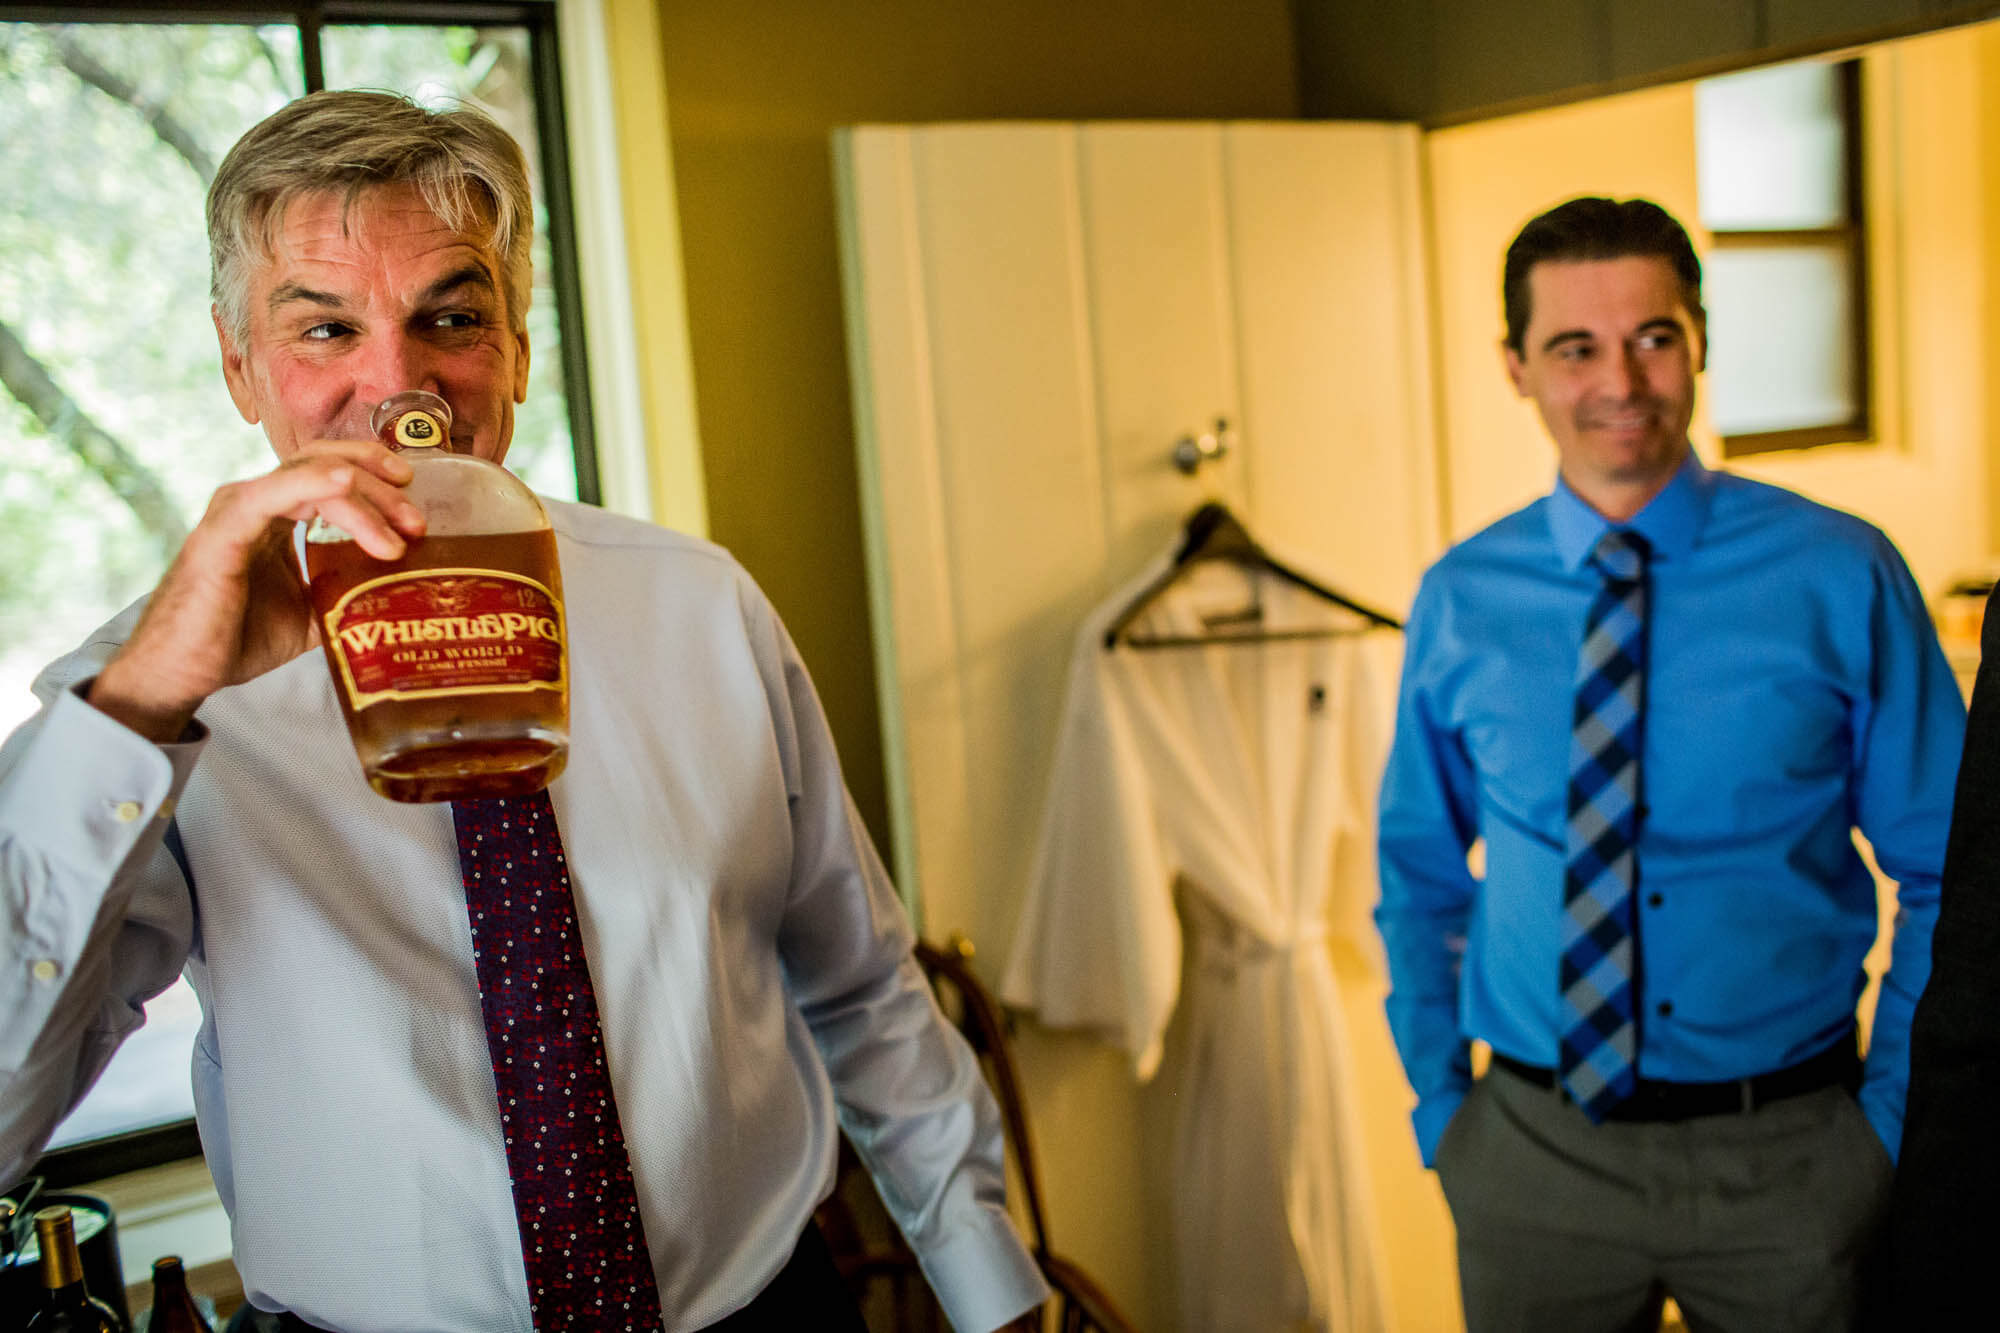 Father of the groom takes a sniff of Whistle Pig Rye whiskey